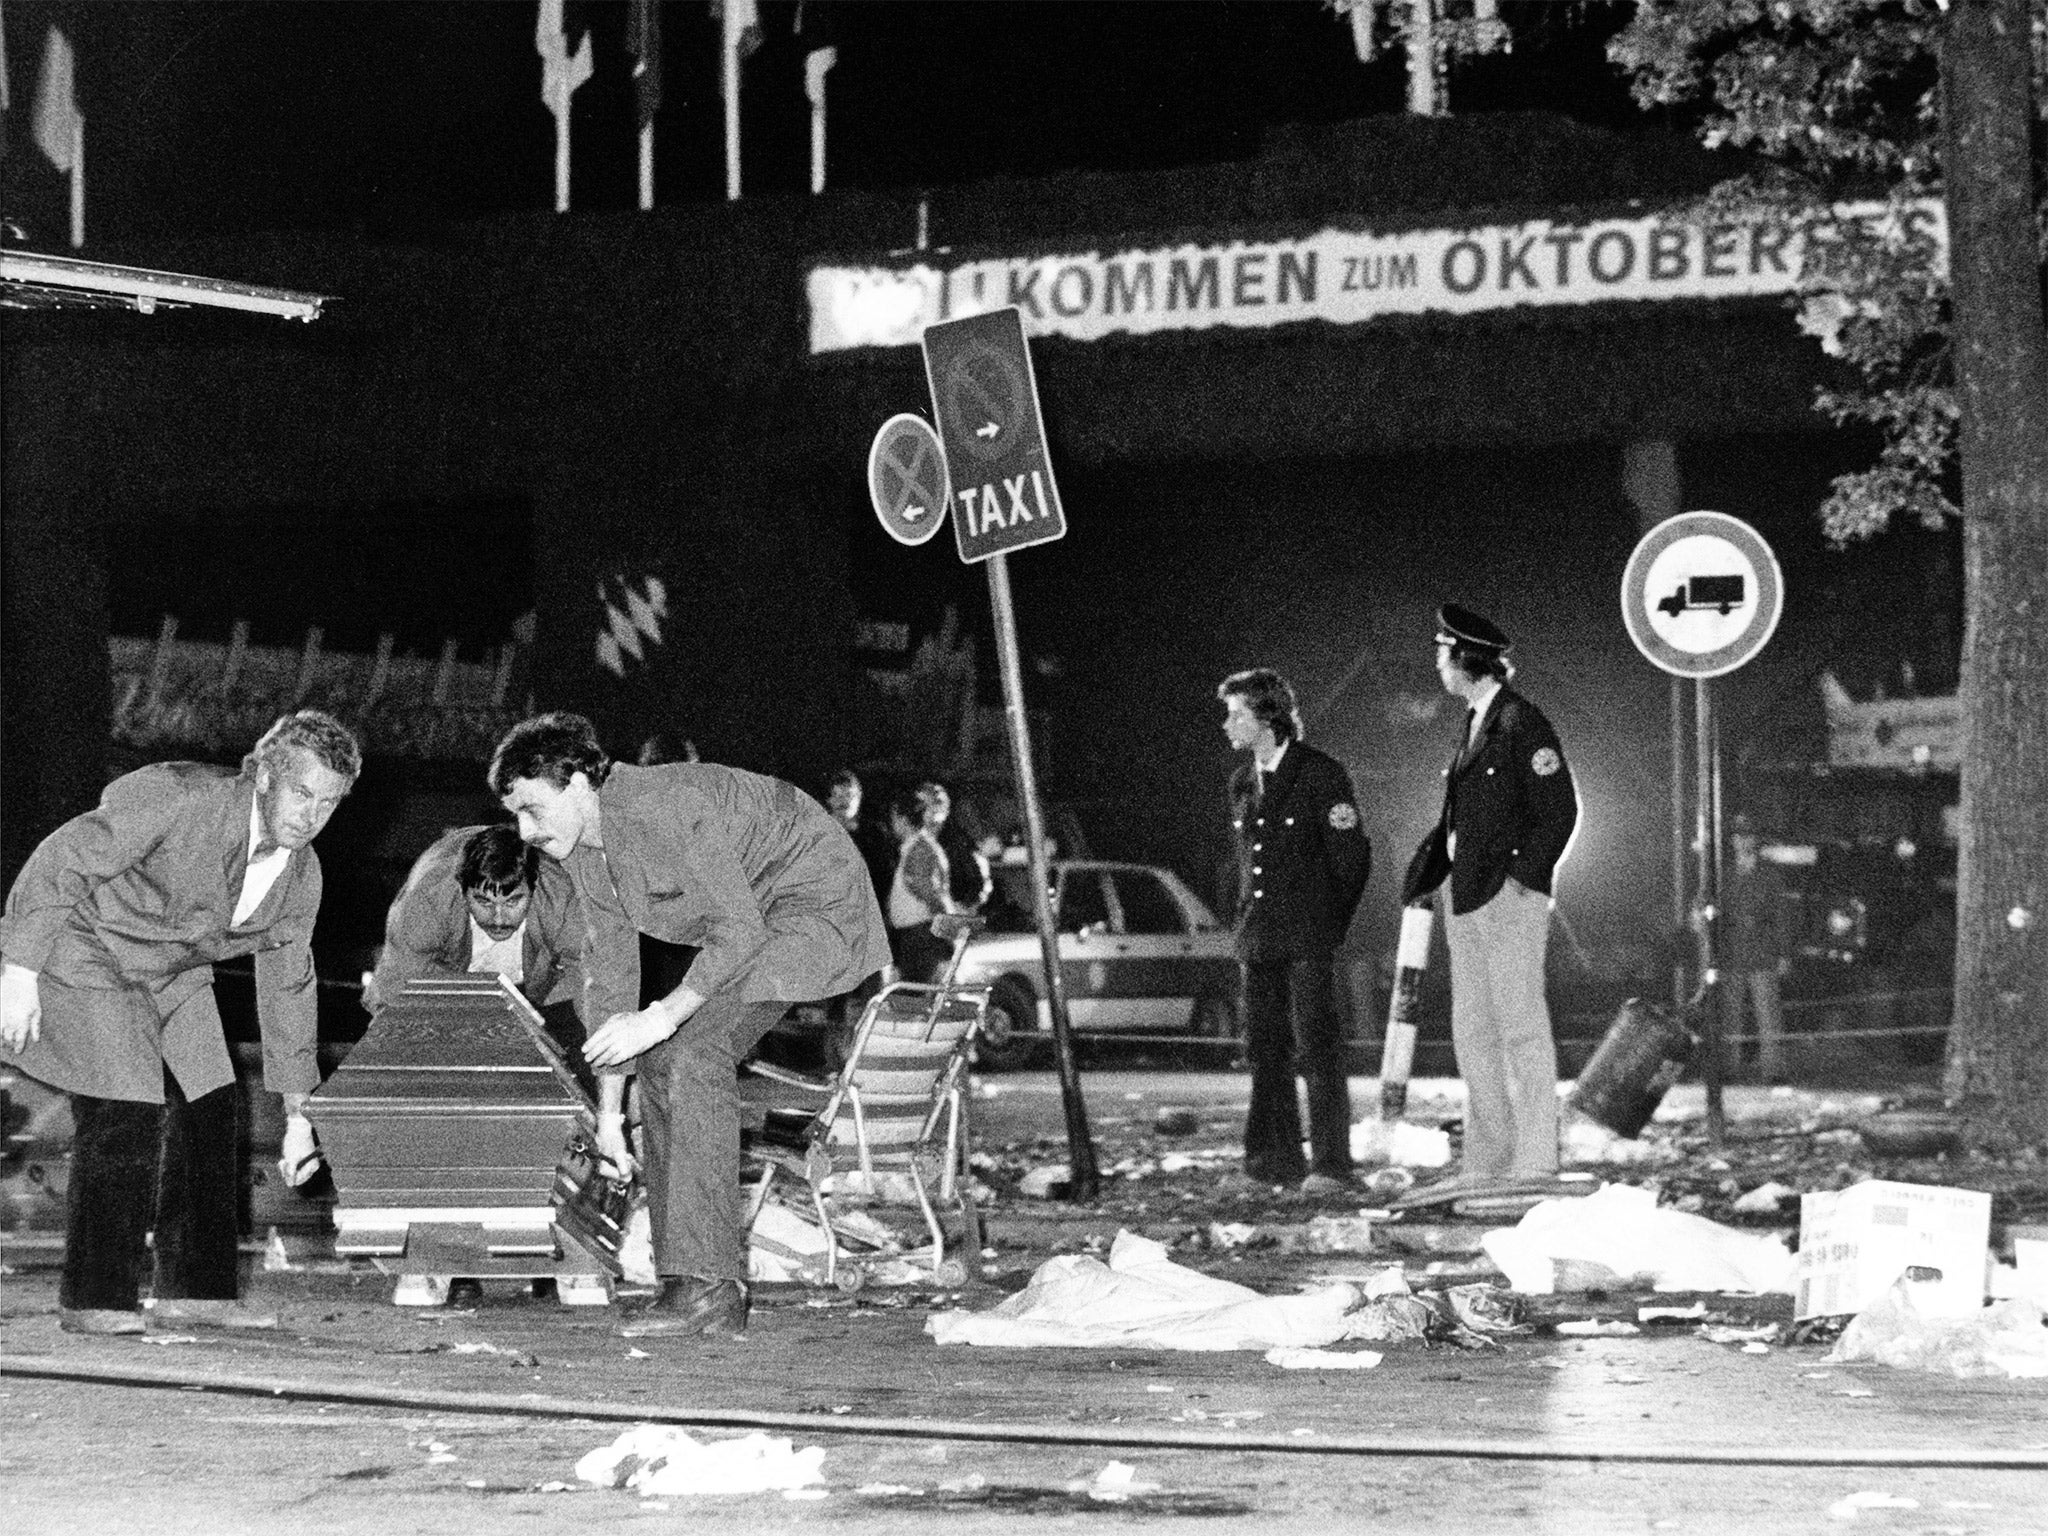 Thirteen were killed in the 1980 attack on the beer festival in Munich